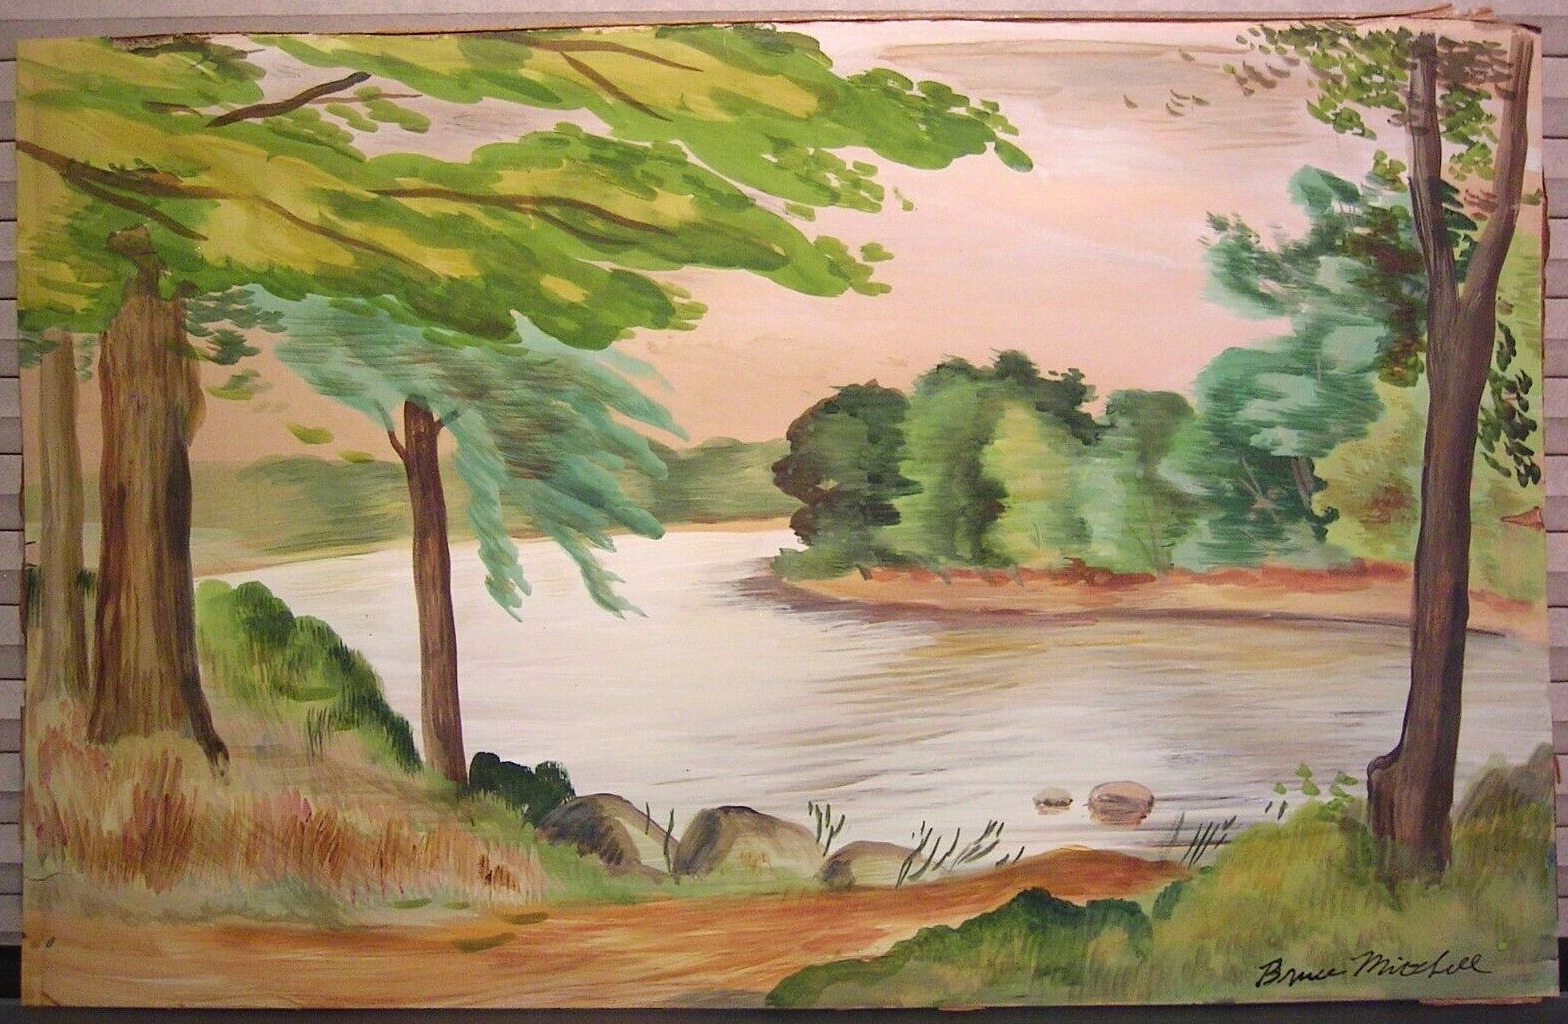 Vintage Bruce Mitchell Signed Watercolor Painting Landscape